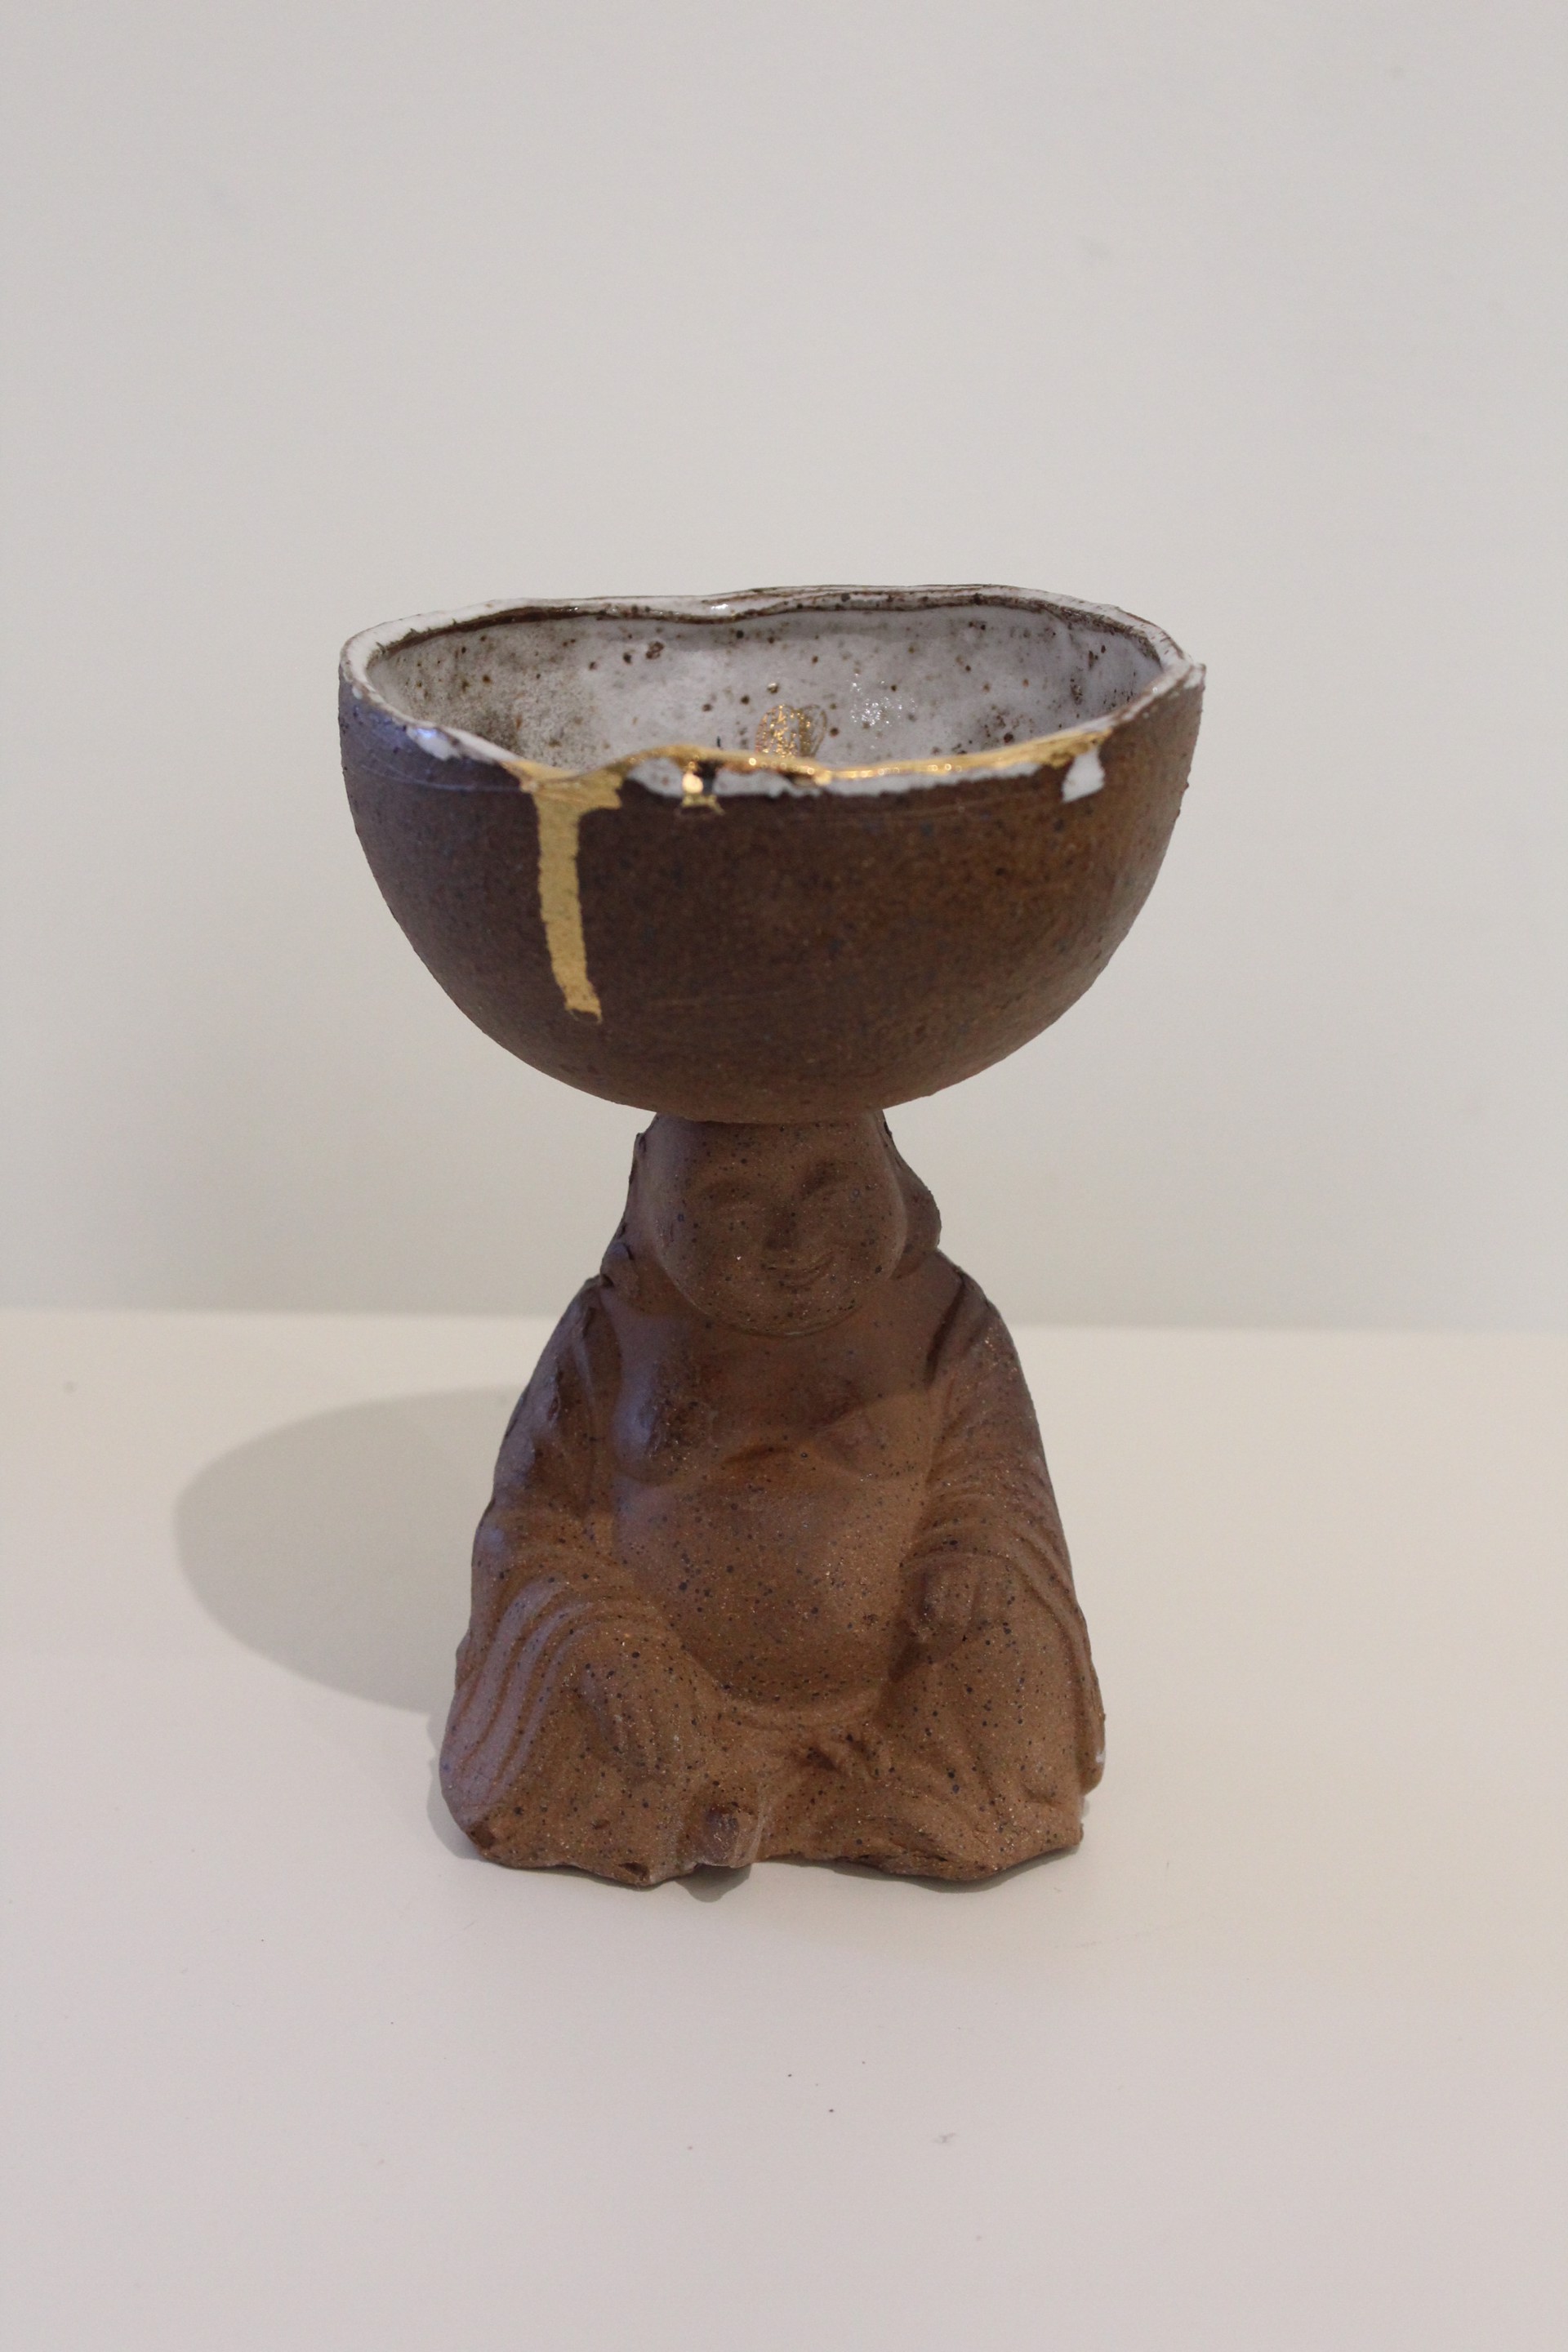 Buddha Bowl 1 (bee) by Therese Knowles